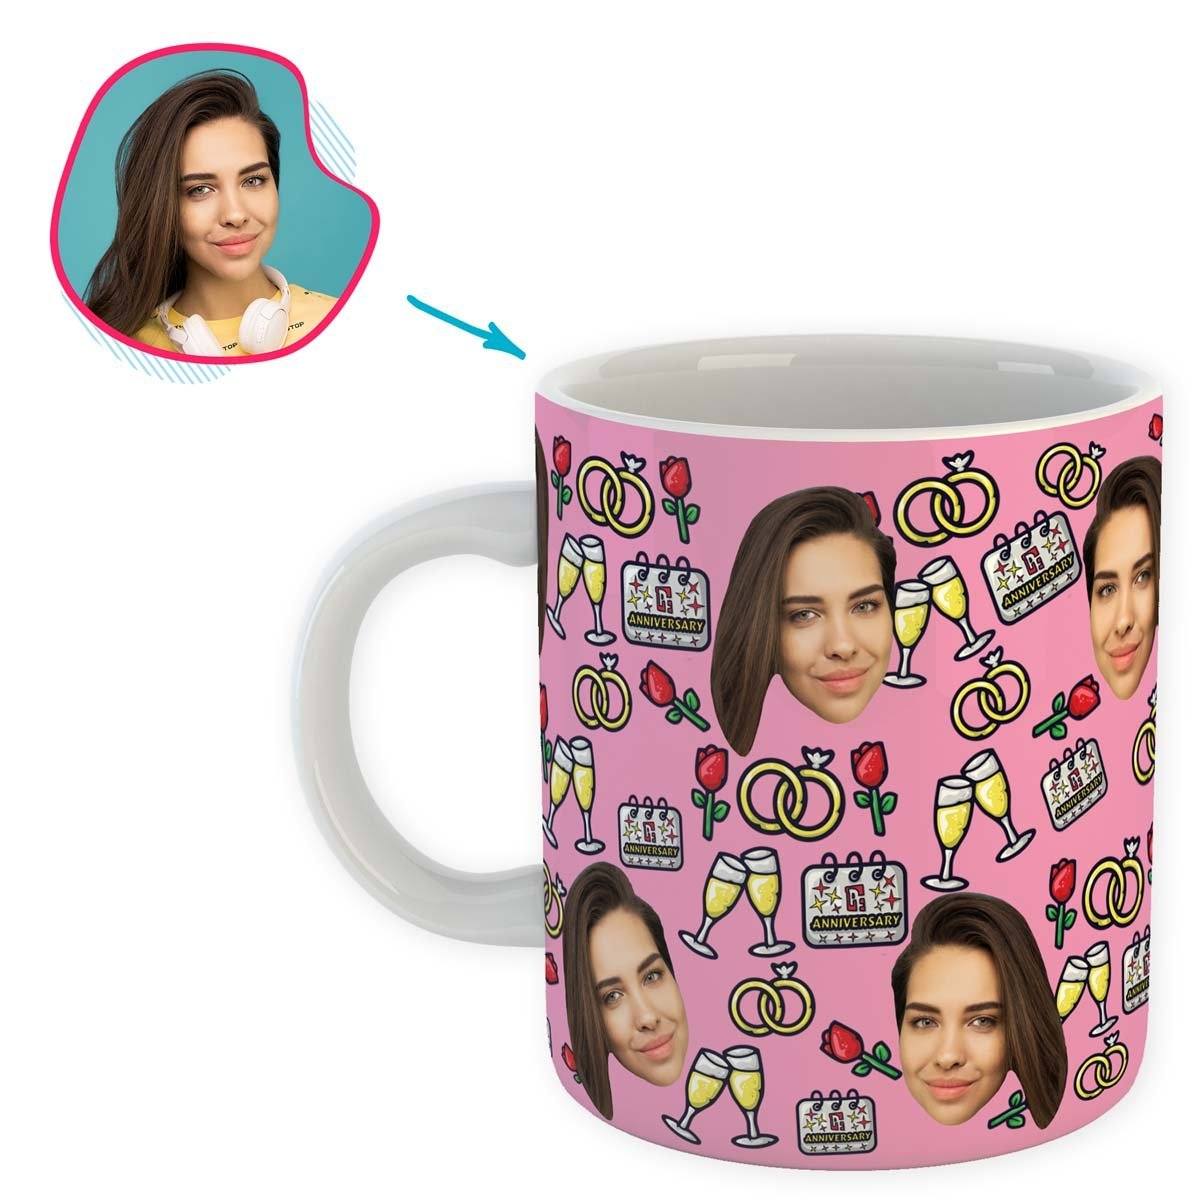 Pink Anniversary personalized mug with photo of face printed on it